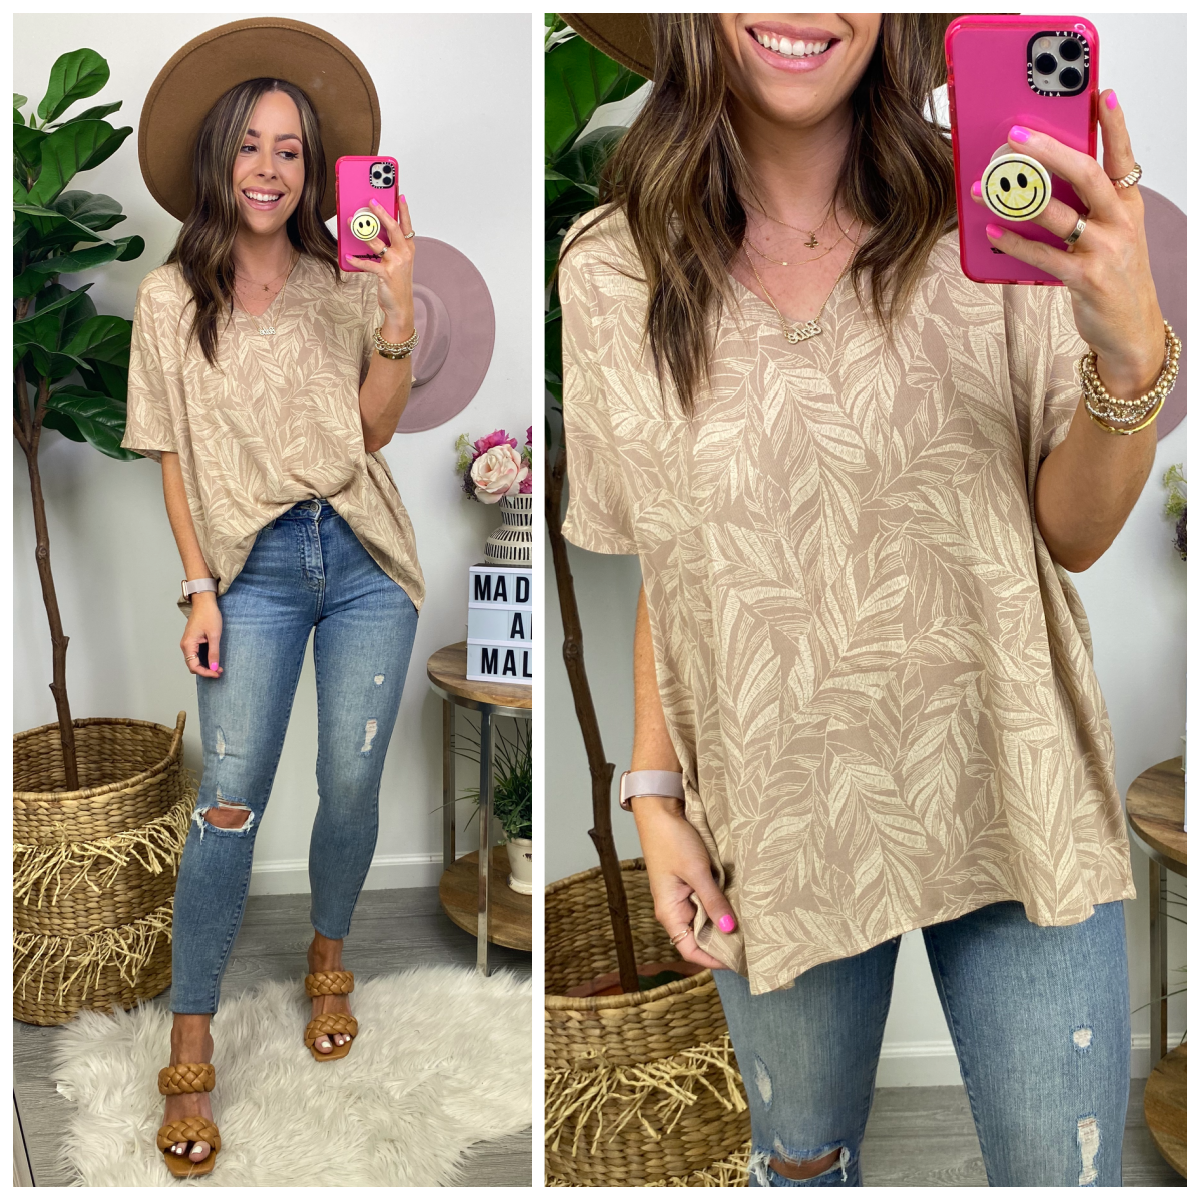  Swift Movements V-Neck Printed Top - Madison and Mallory